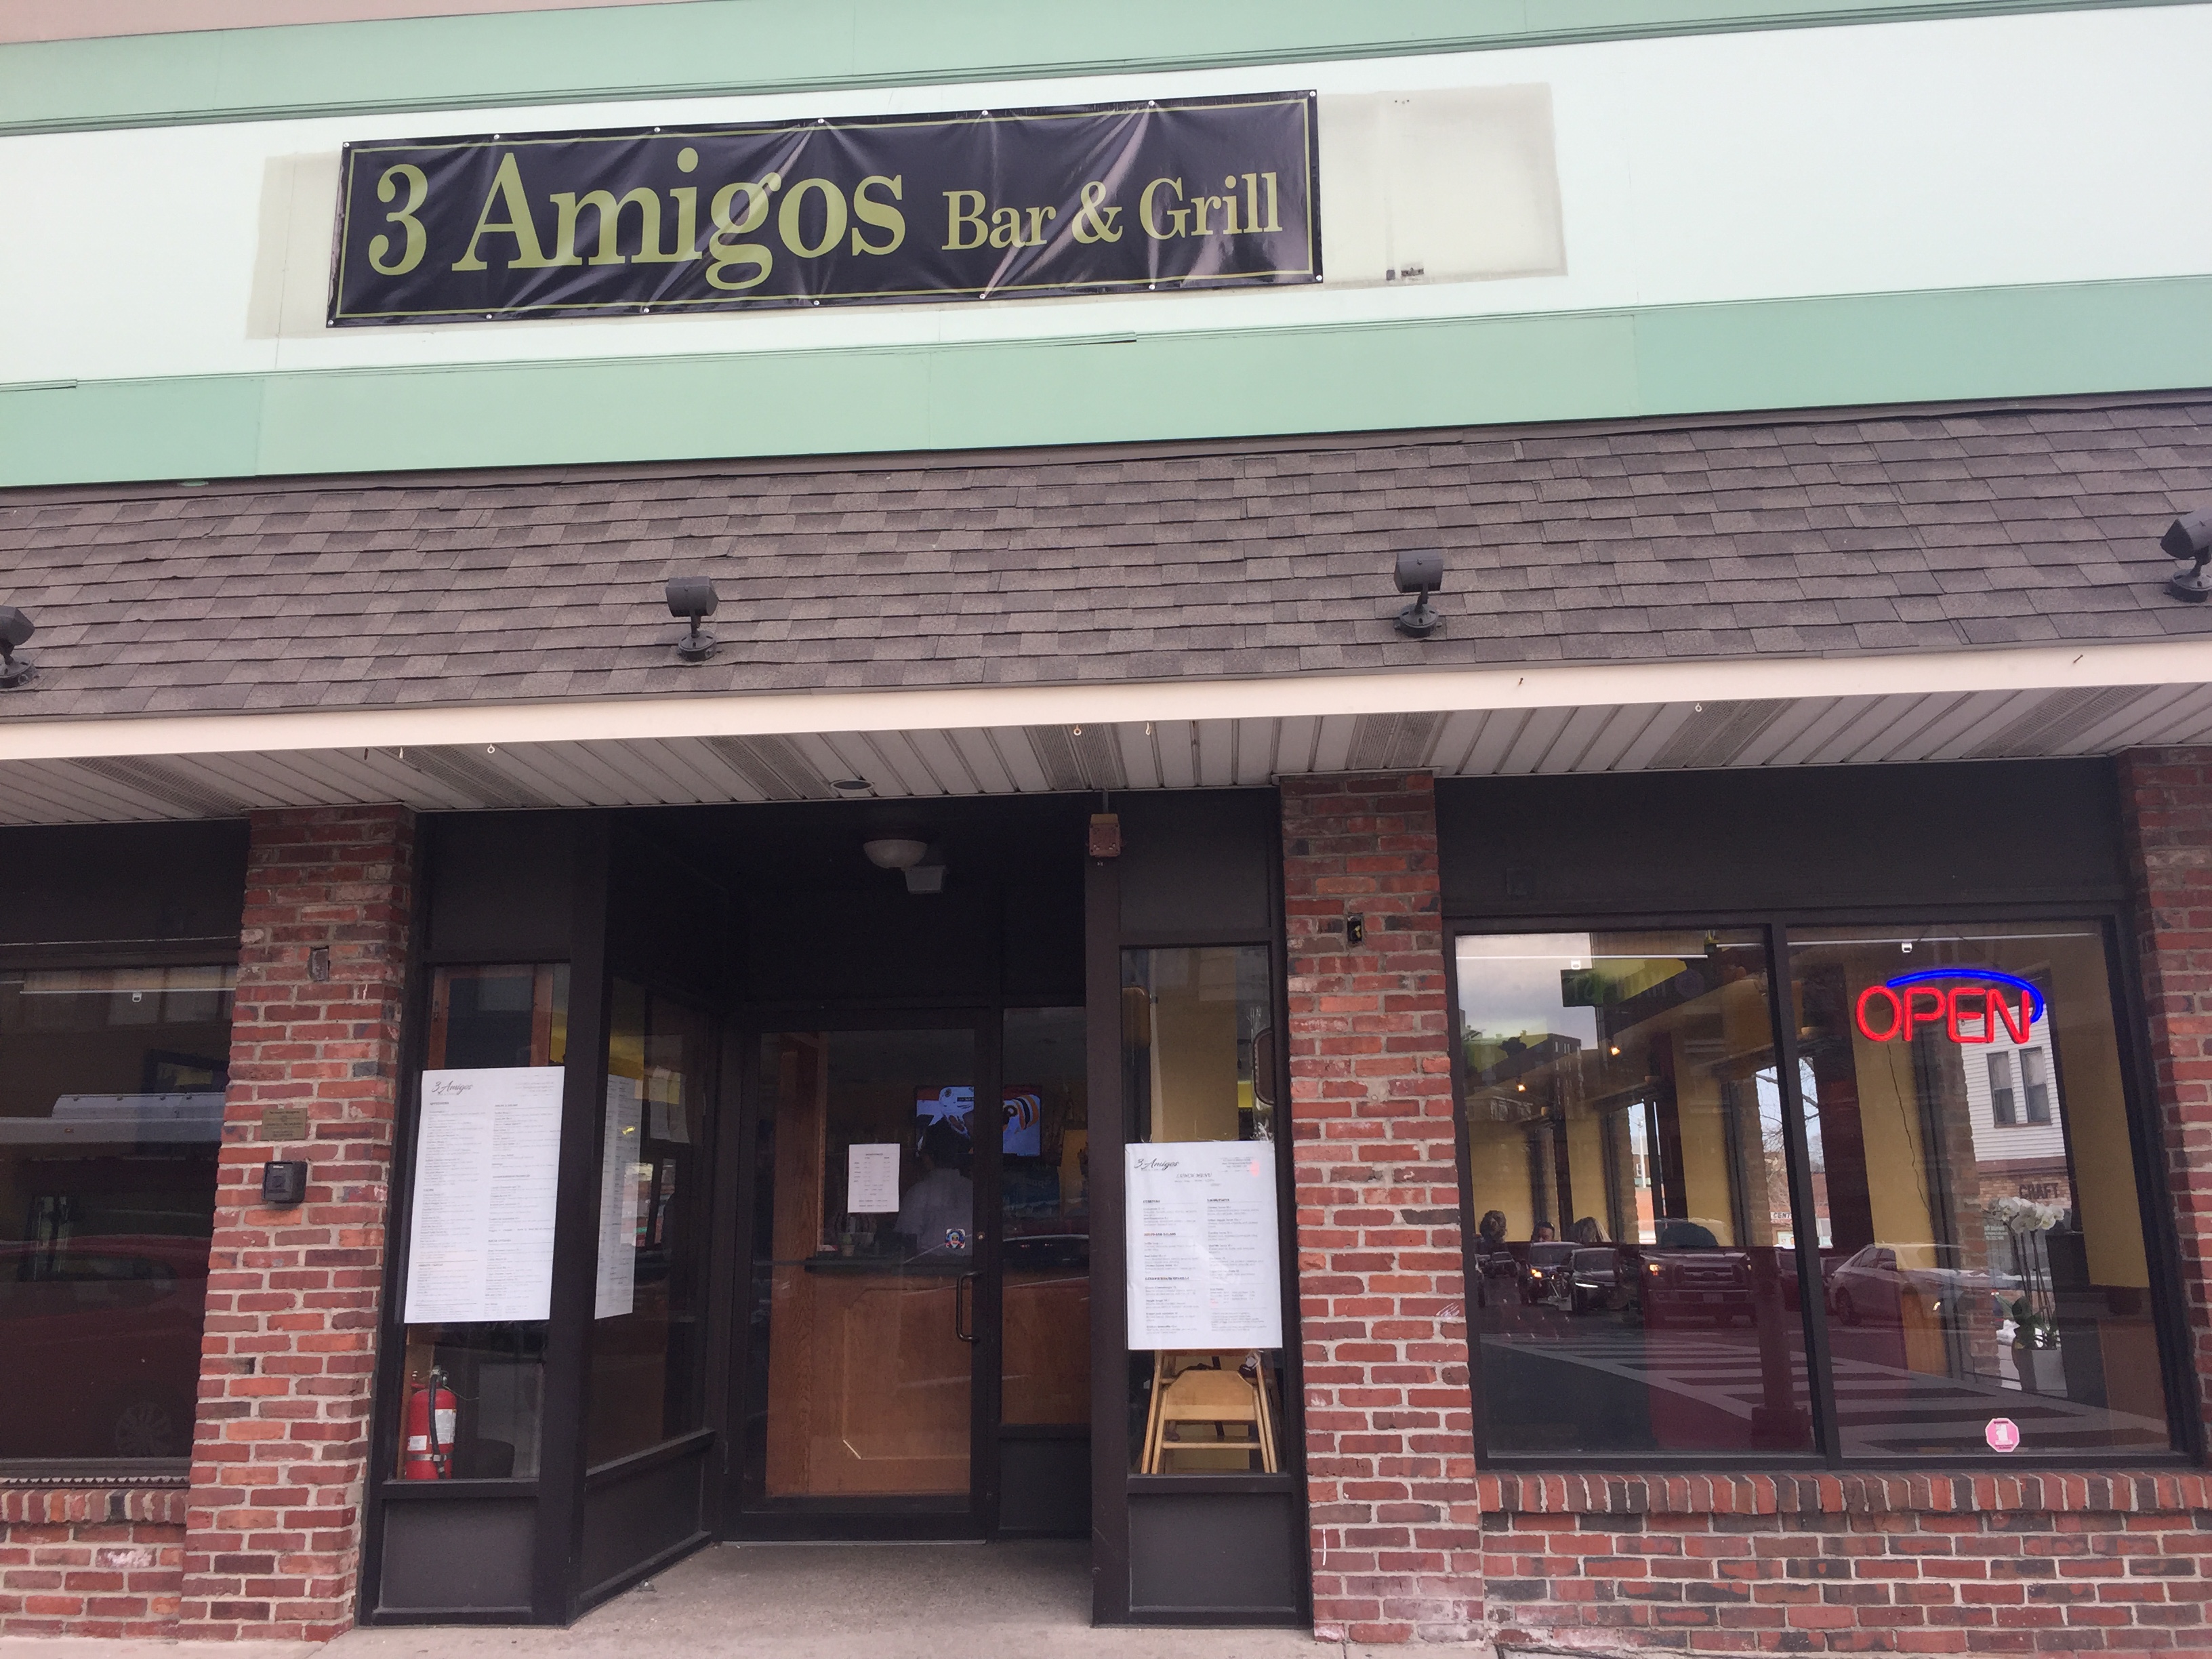 3 Amigos Opens Up On Main - The Blue and Gold